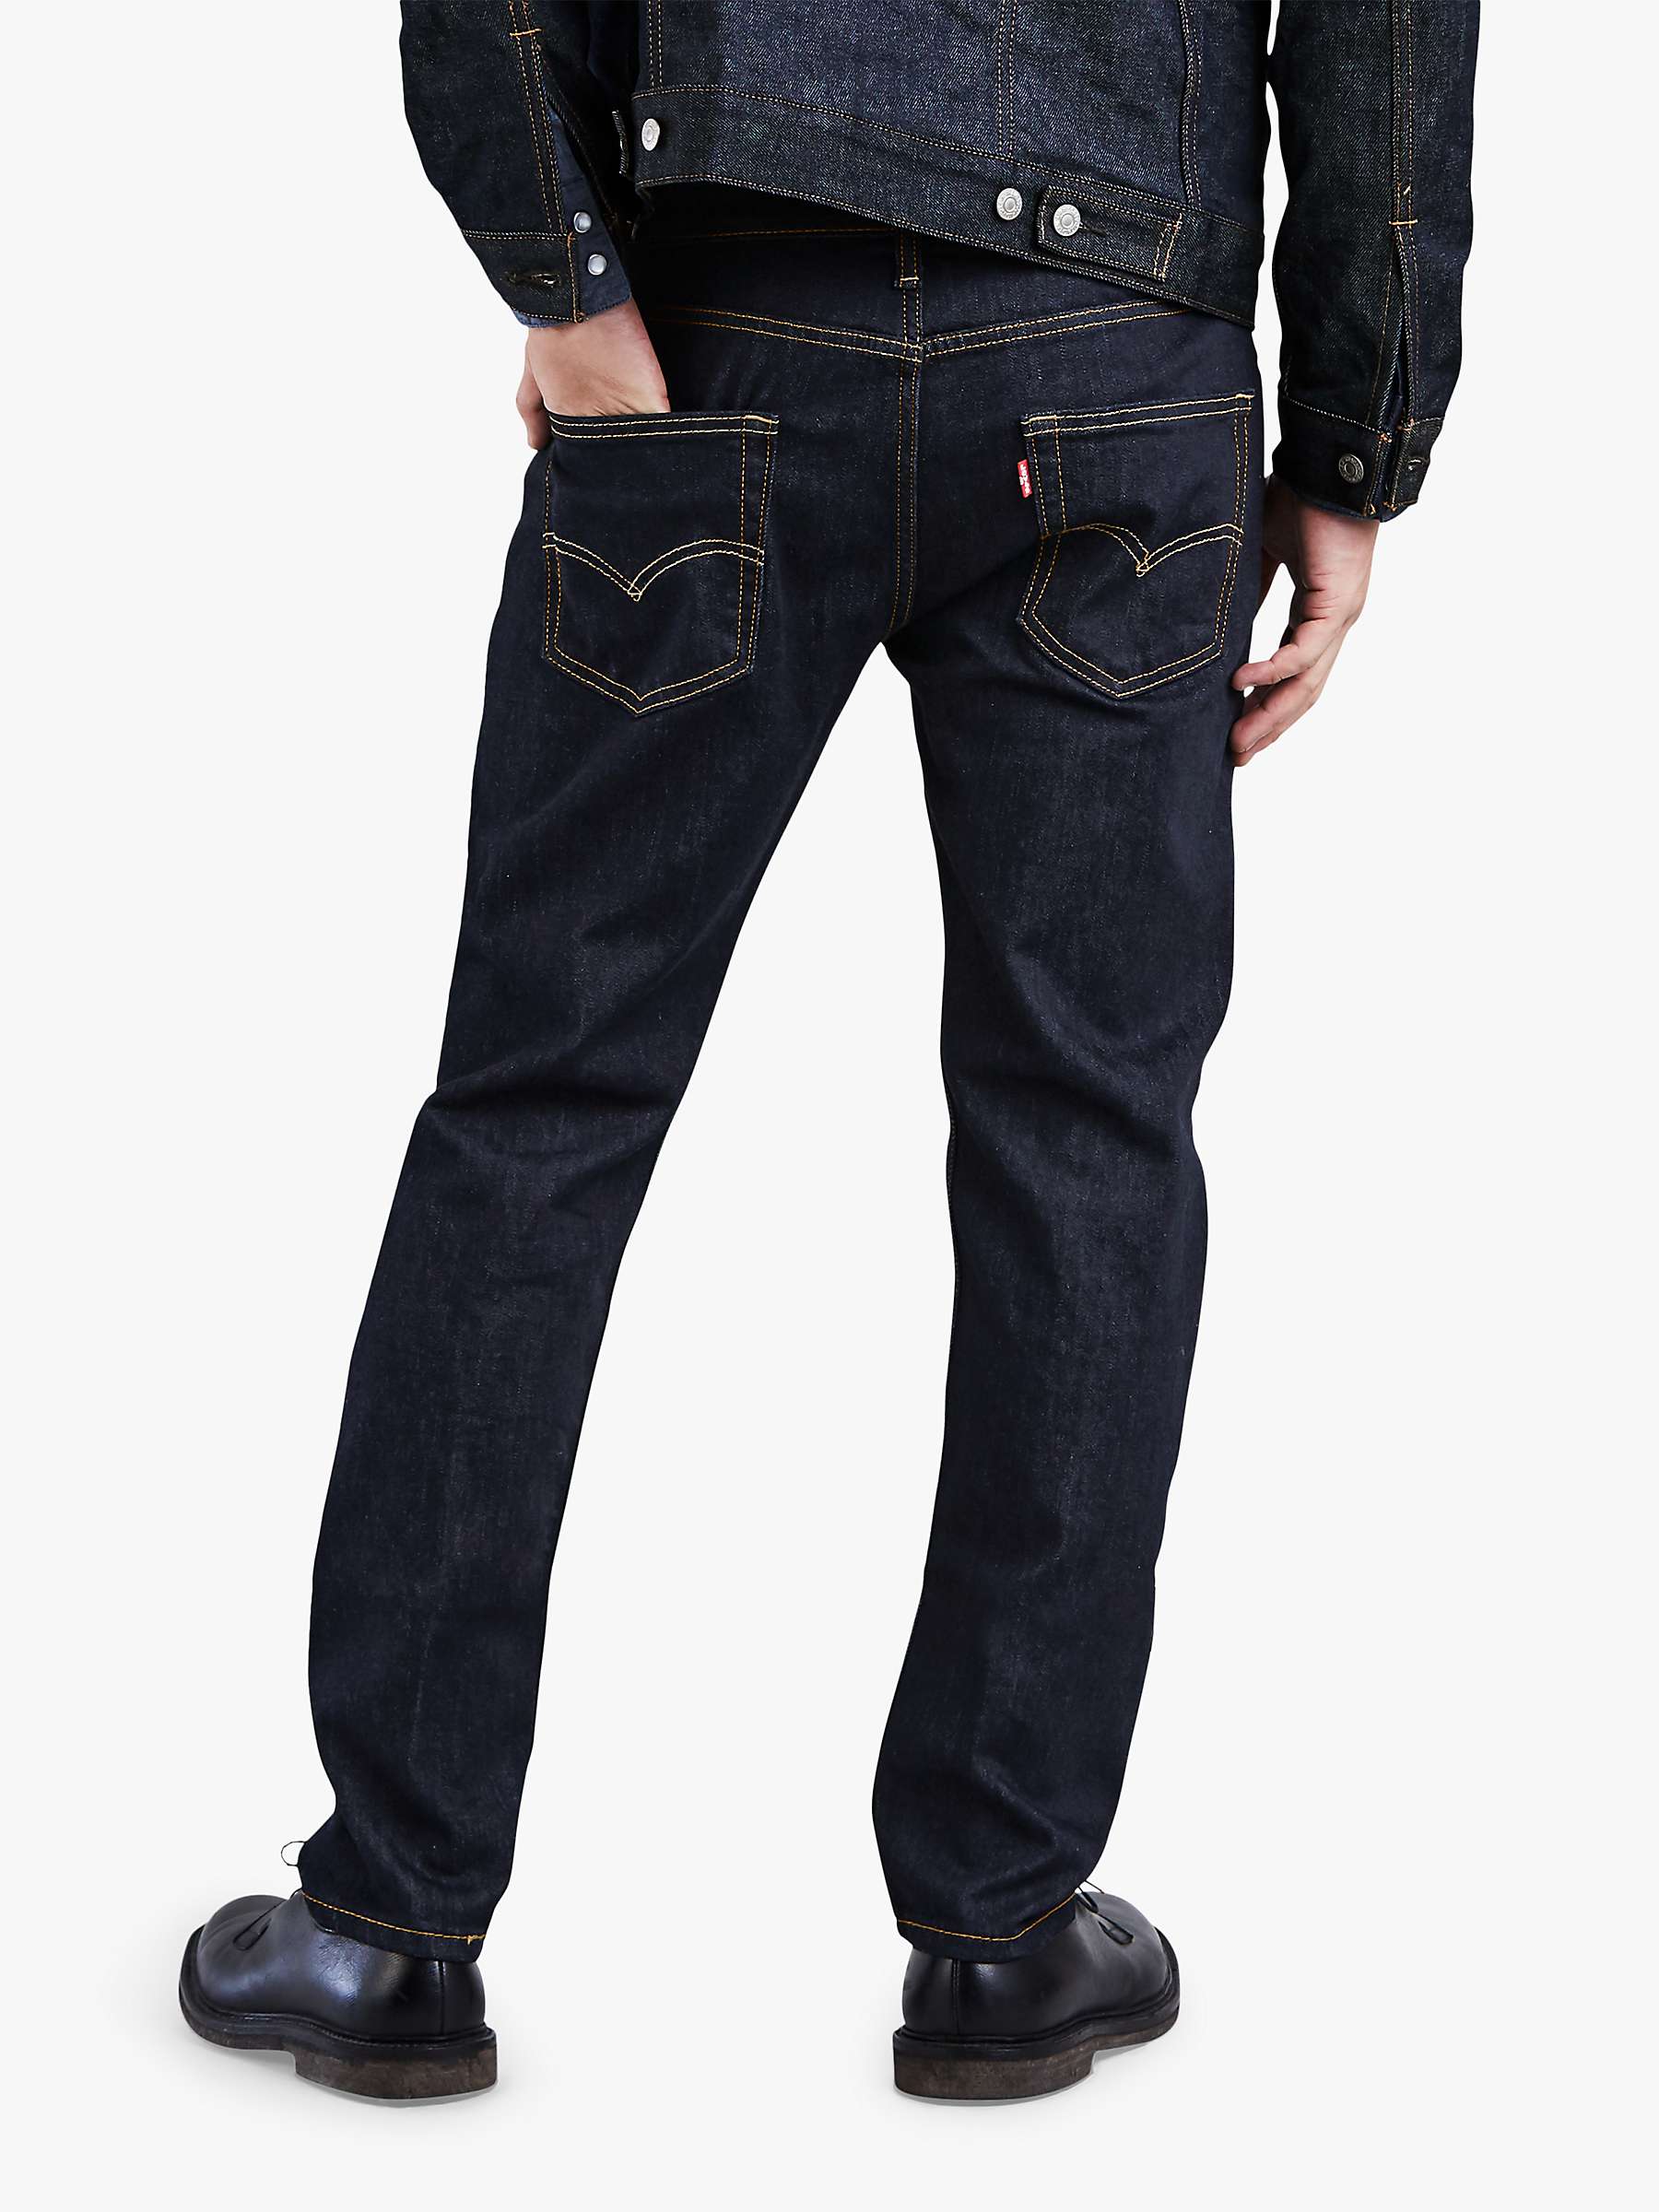 Levi's 502 Regular Tapered Jeans, Rock Cod at John Lewis & Partners